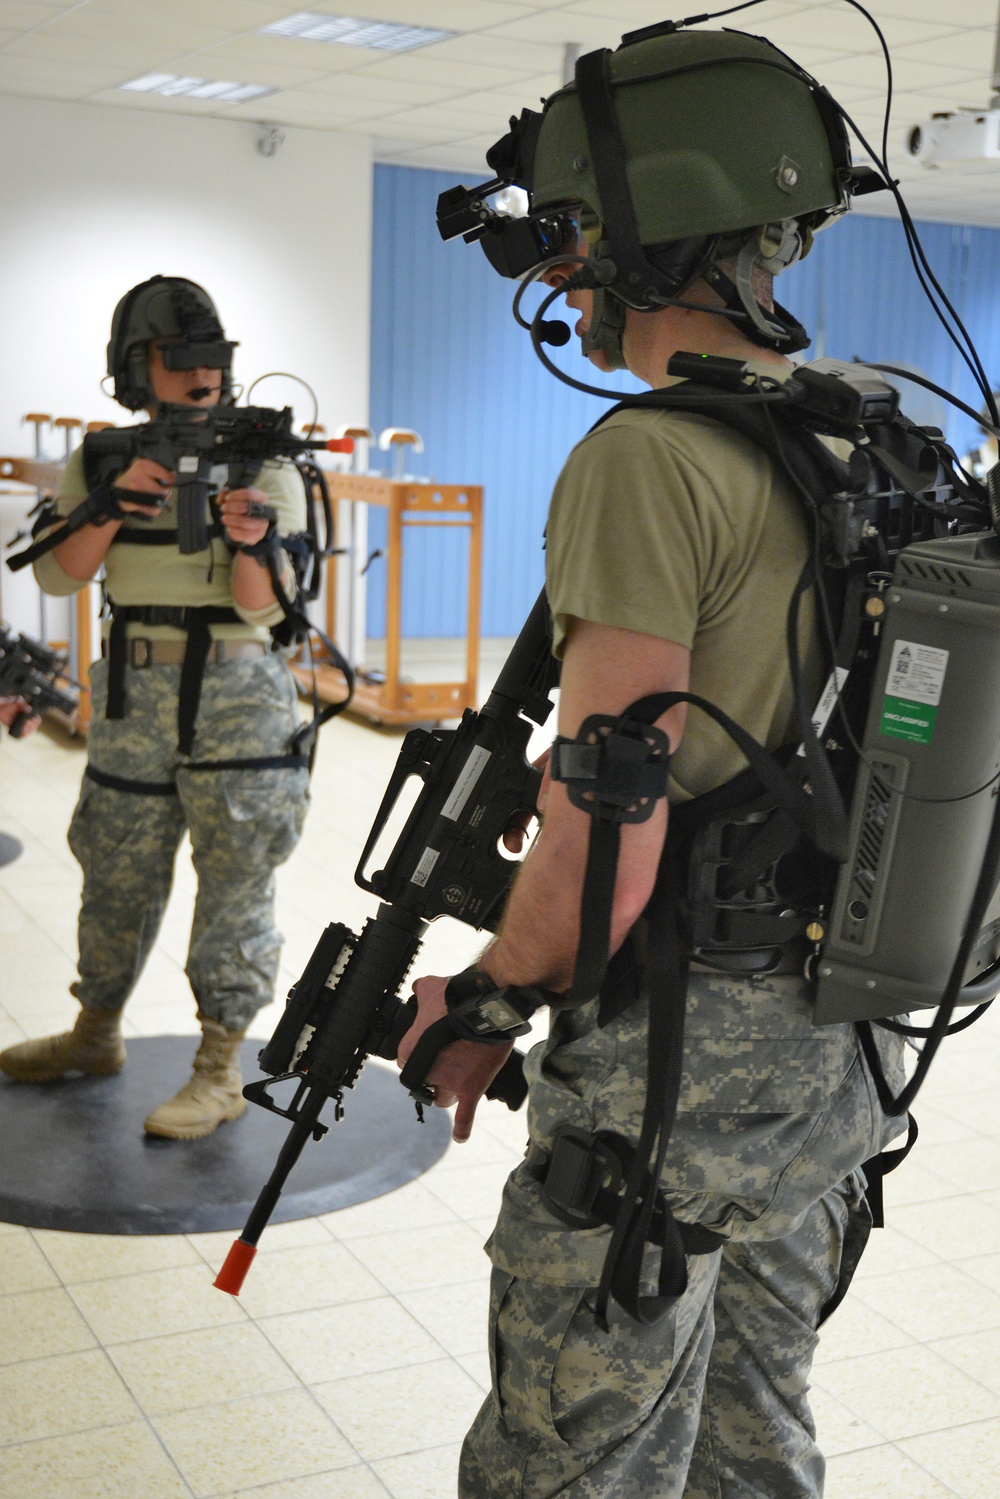 412th Aviation Support Battalion trains at the Dismounted Soldier Training System (DSTS)